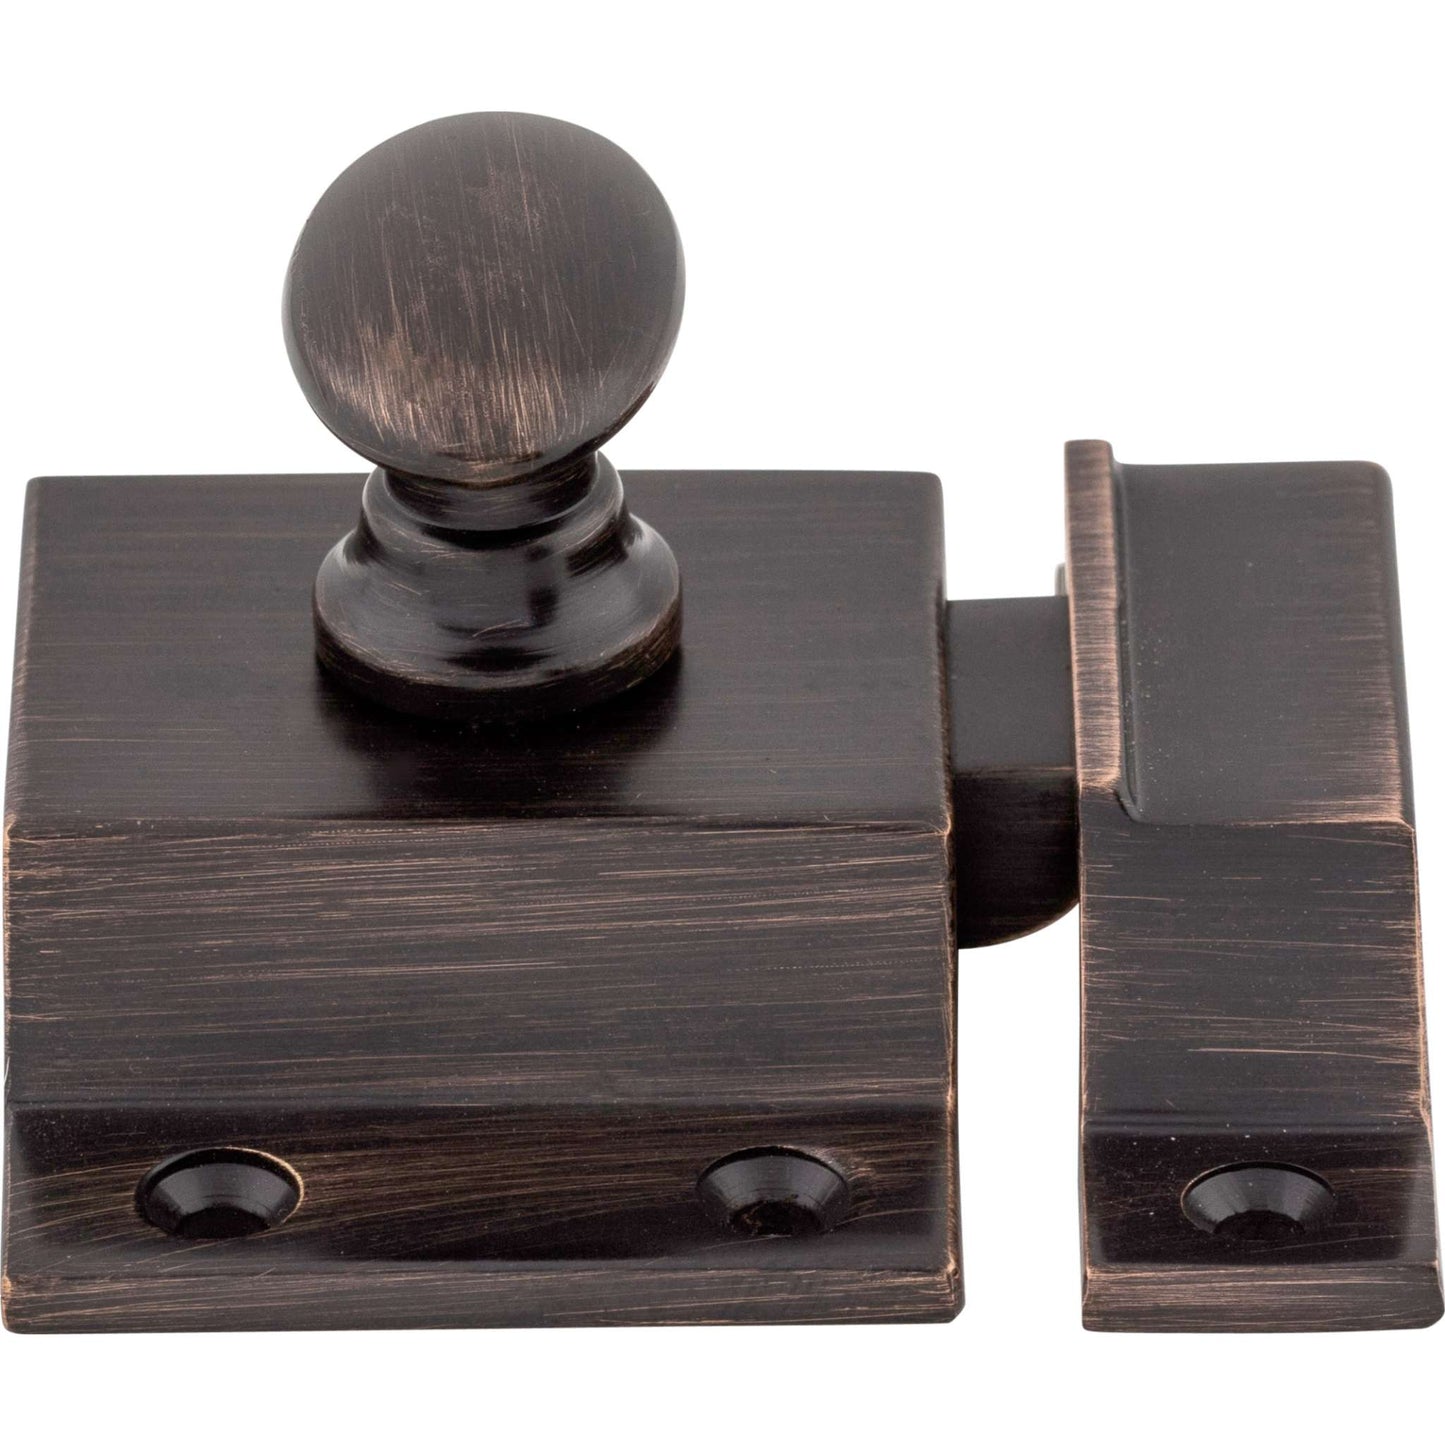 Top Knobs - Cabinet Latch